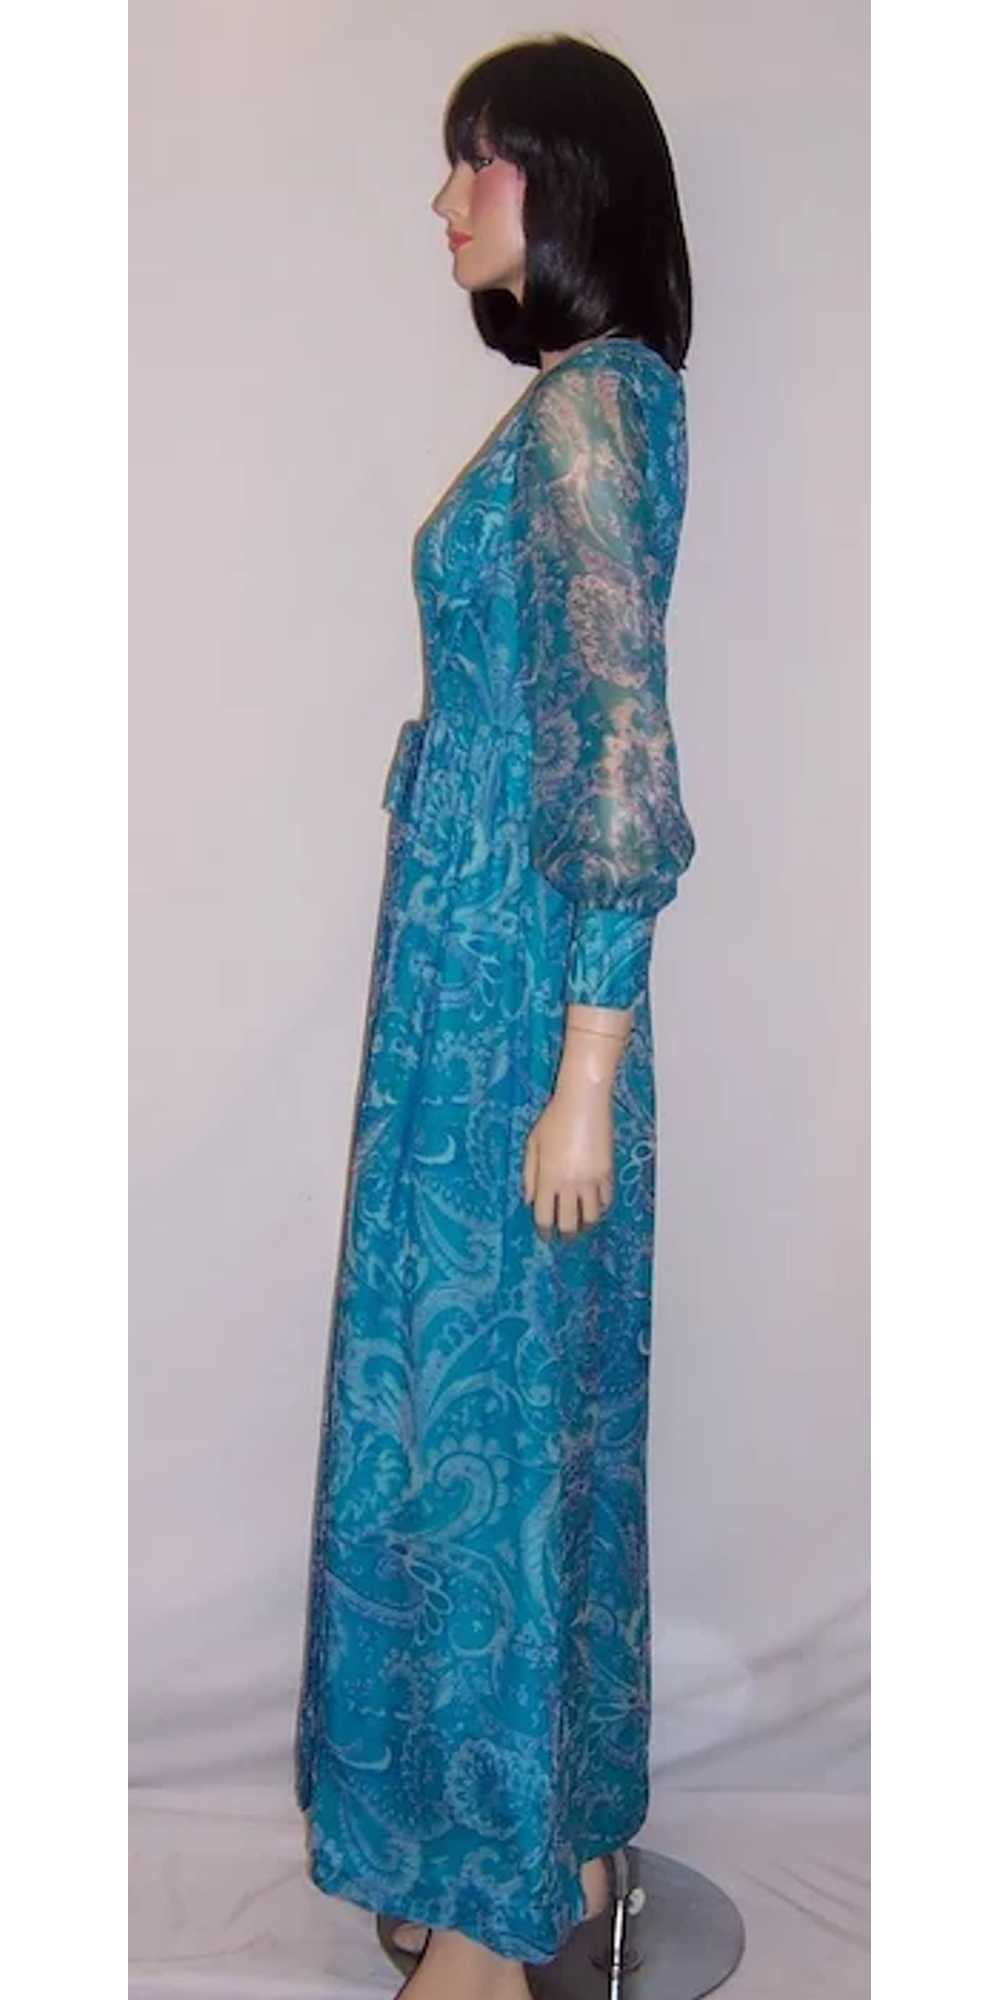 1960's Turquoise Printed Paisley Chiffon Gown - image 4